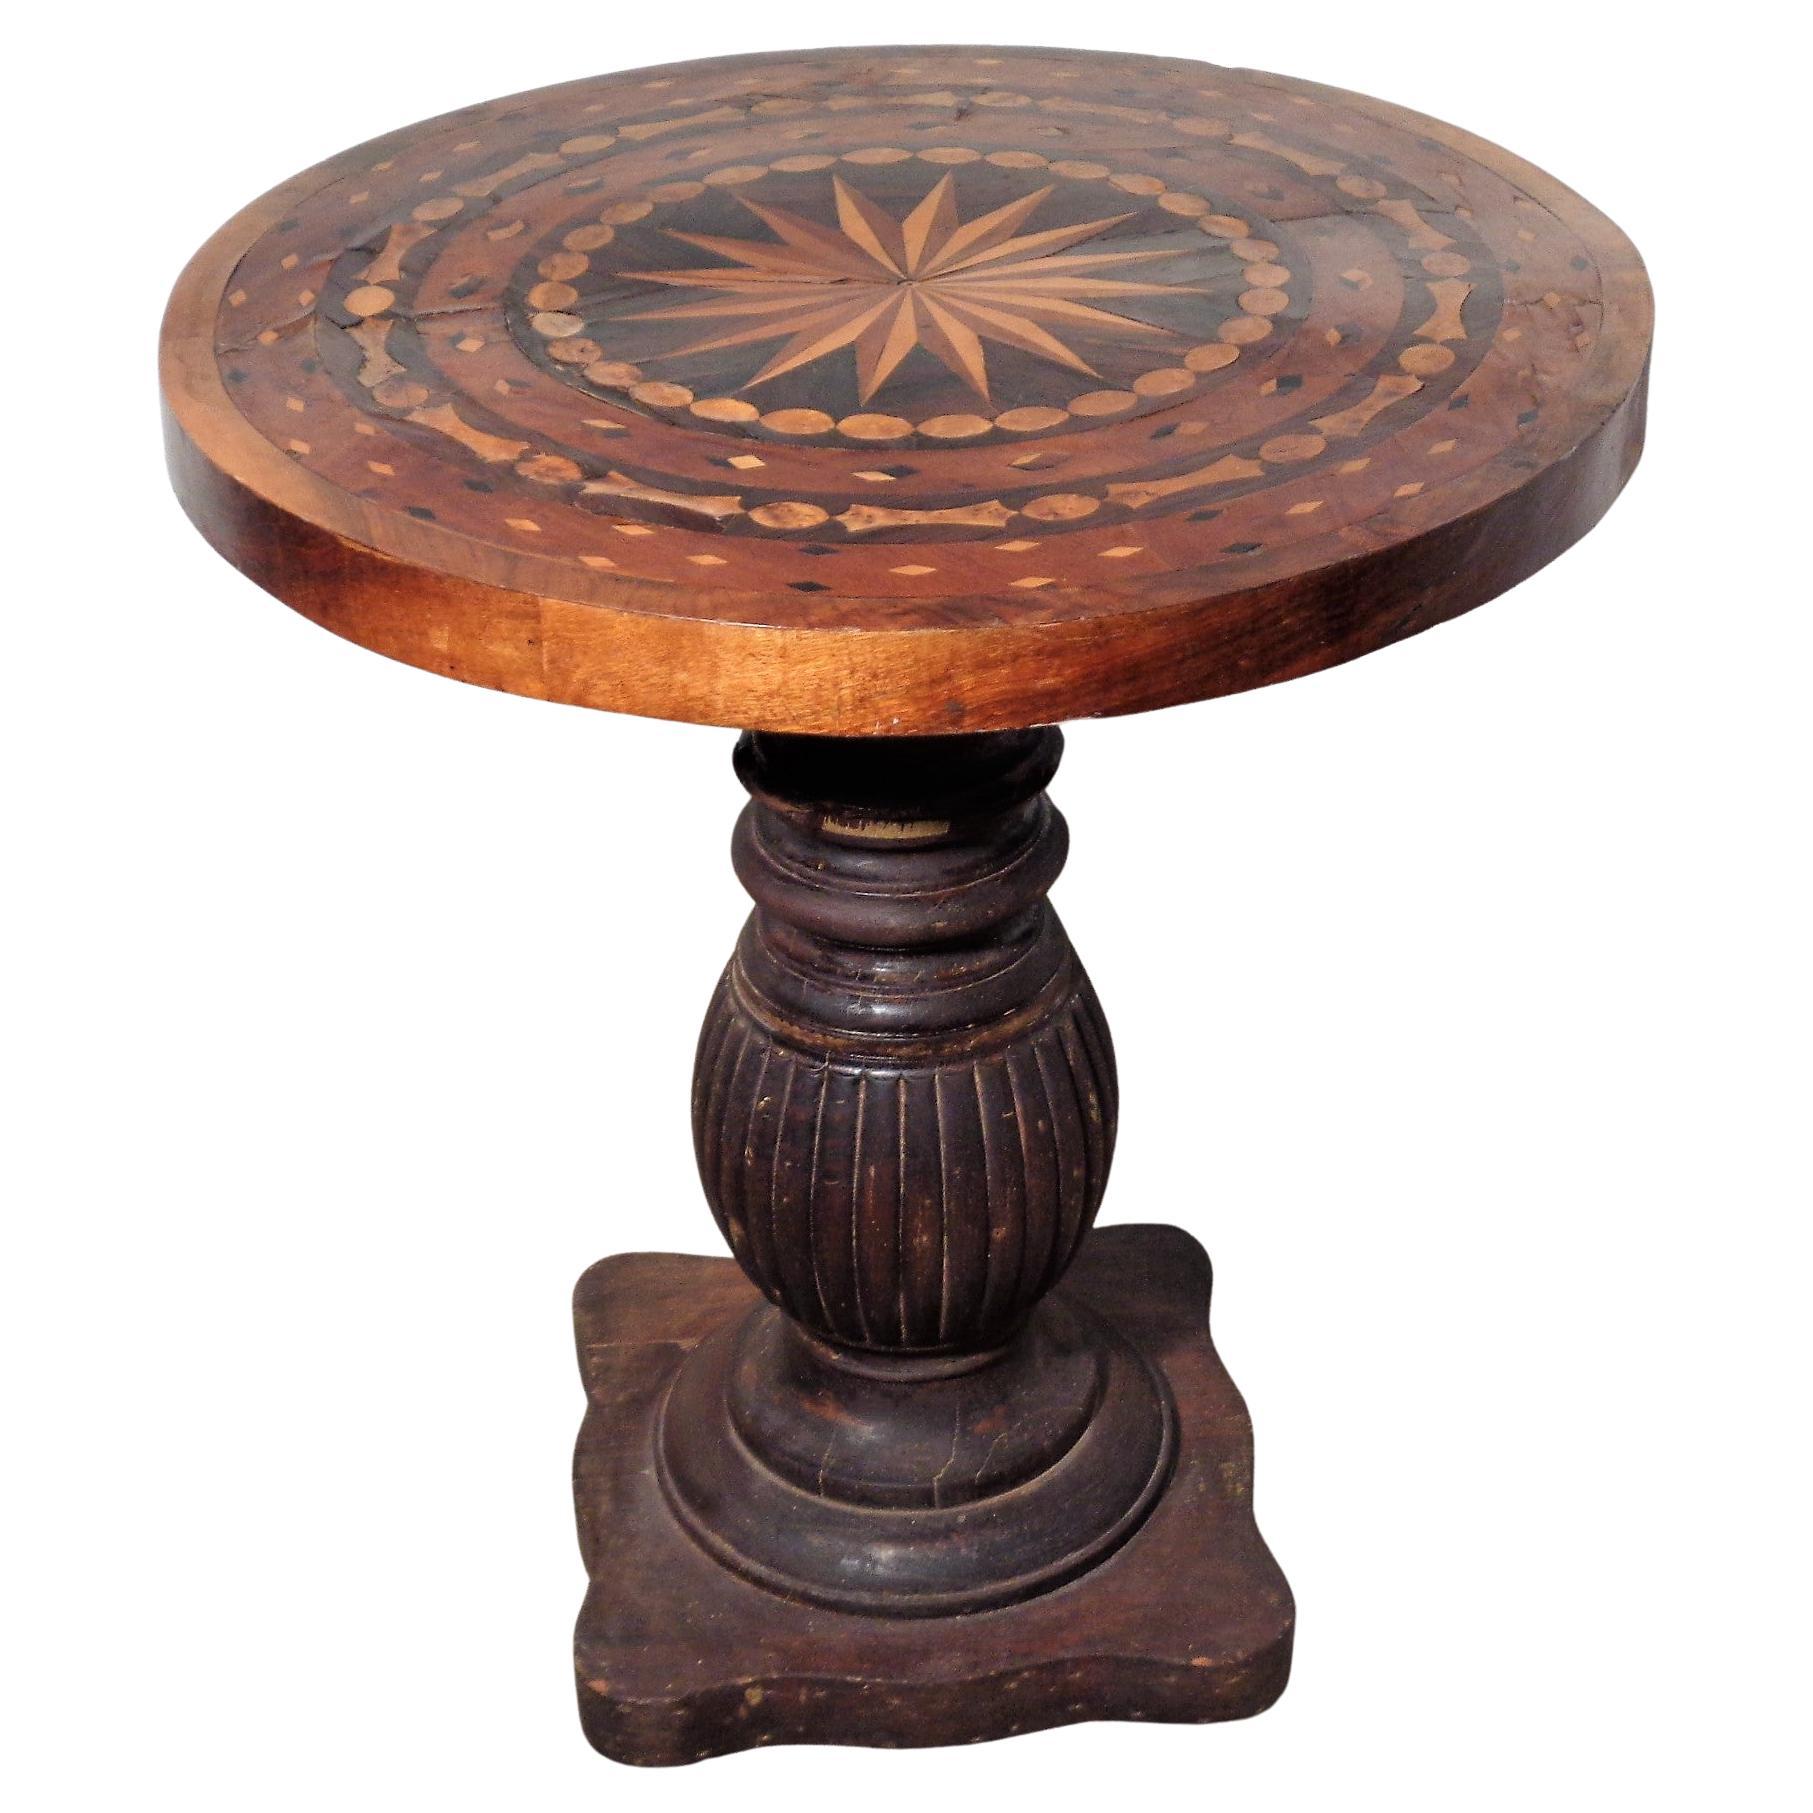 Hand-Carved Antique Parquetry Inlaid Compass Design Top Table w/ Fluted Pedestal Base For Sale